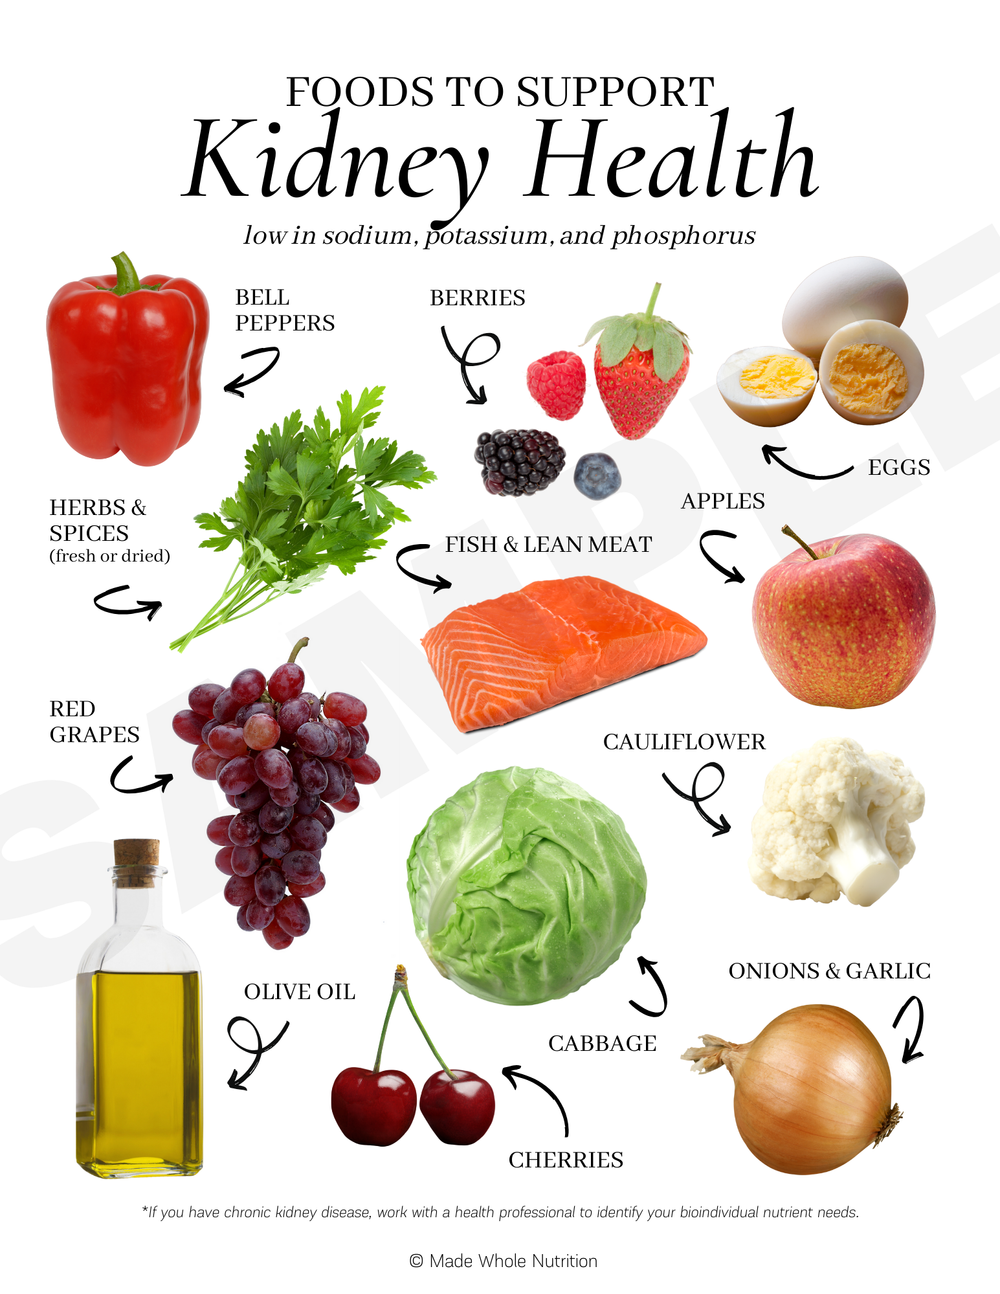 Foods to Support Kidney Health